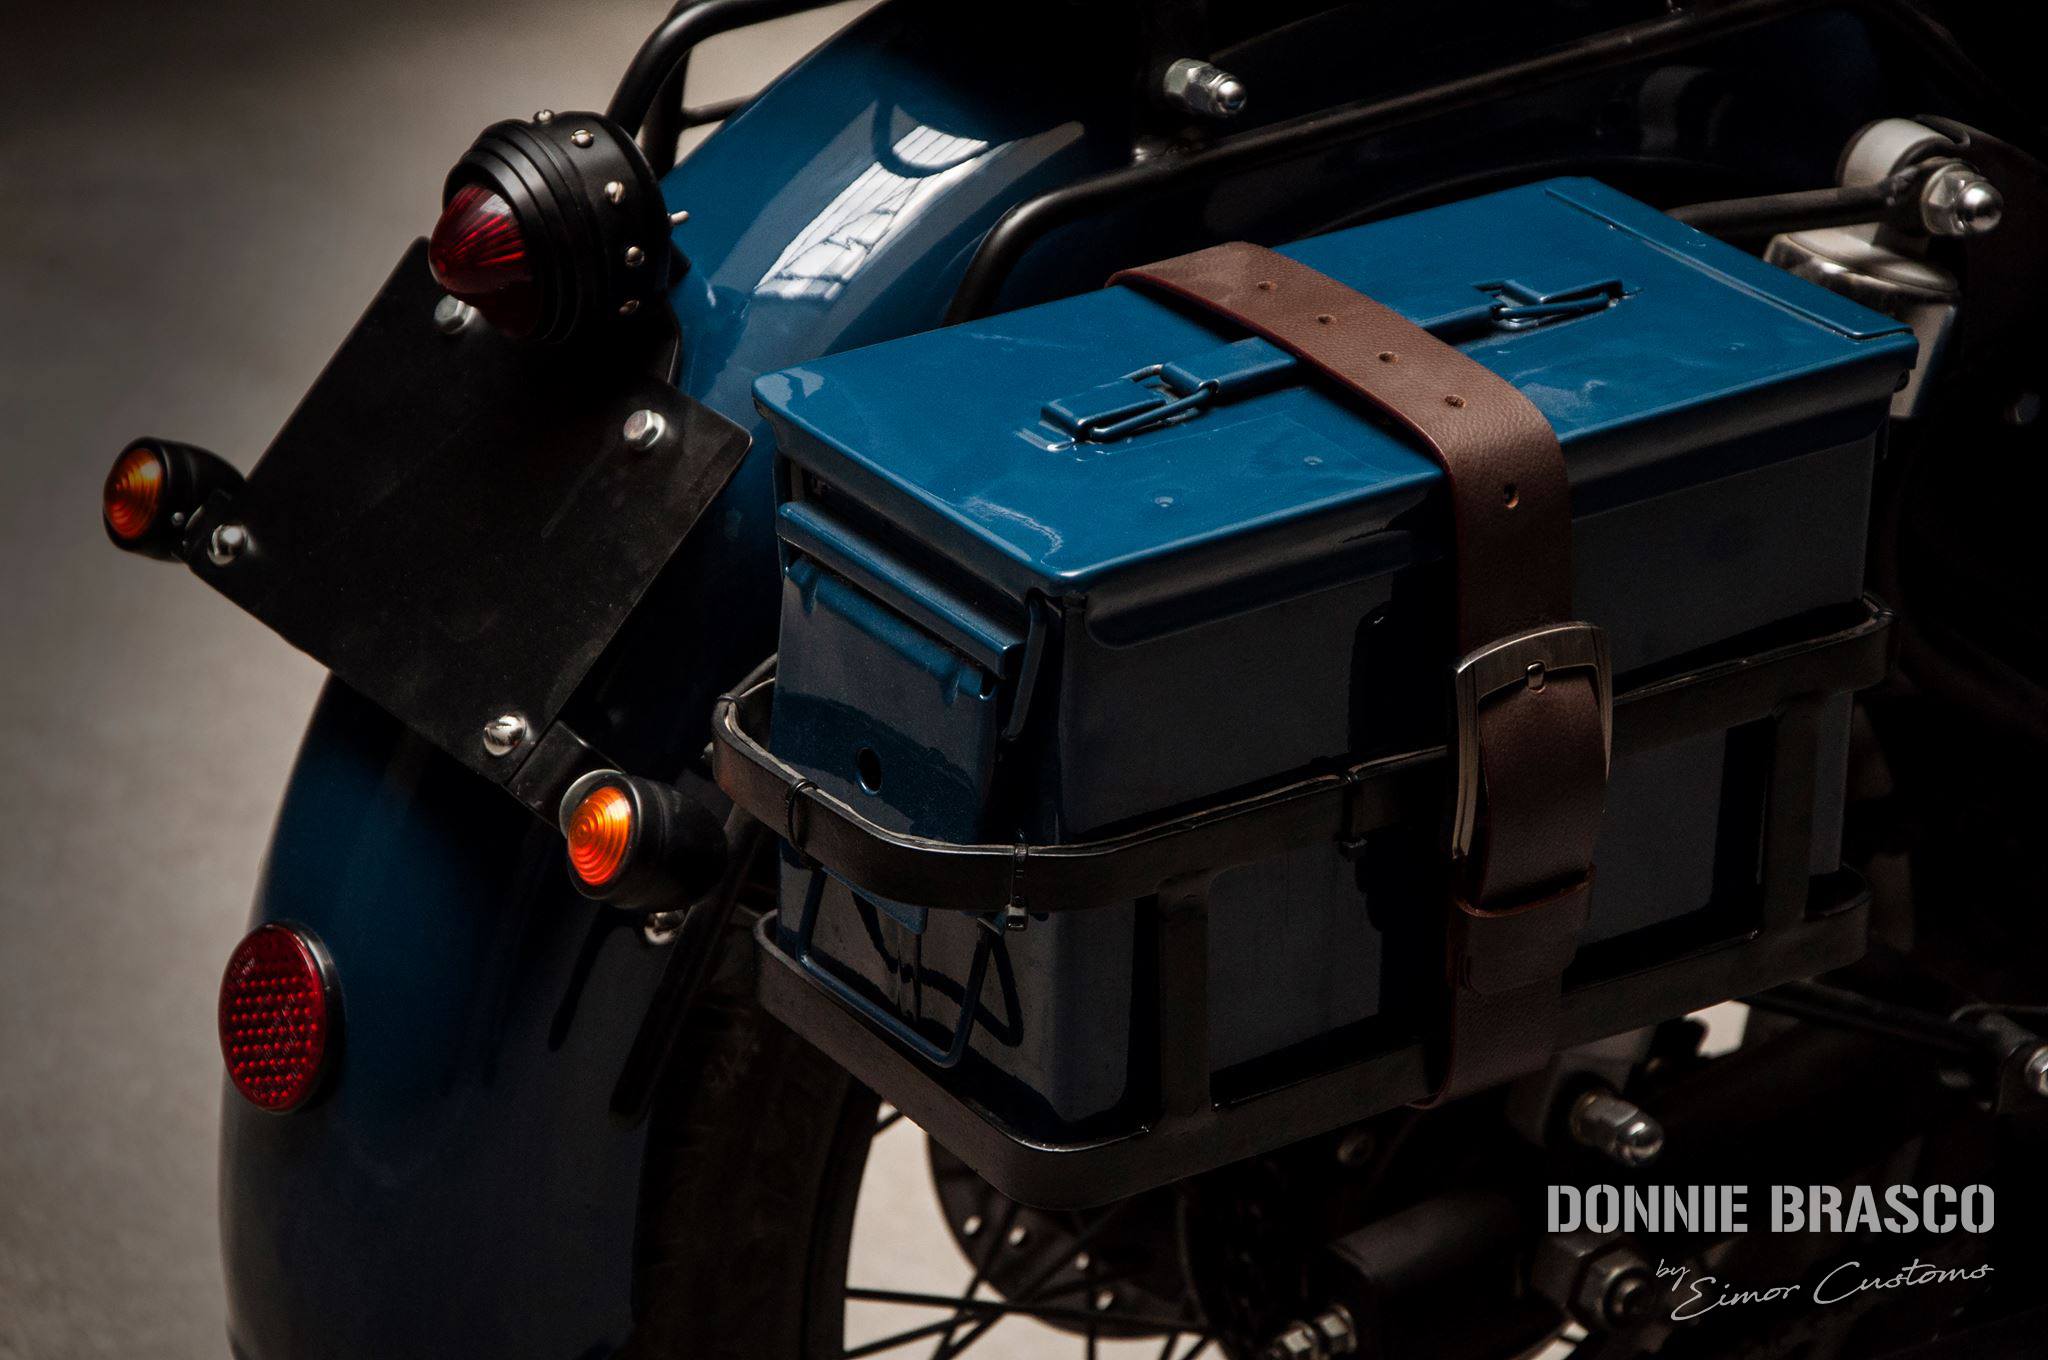 Royal Enfield Classic 'Donnie Brasco' Edition Details and Photos - back